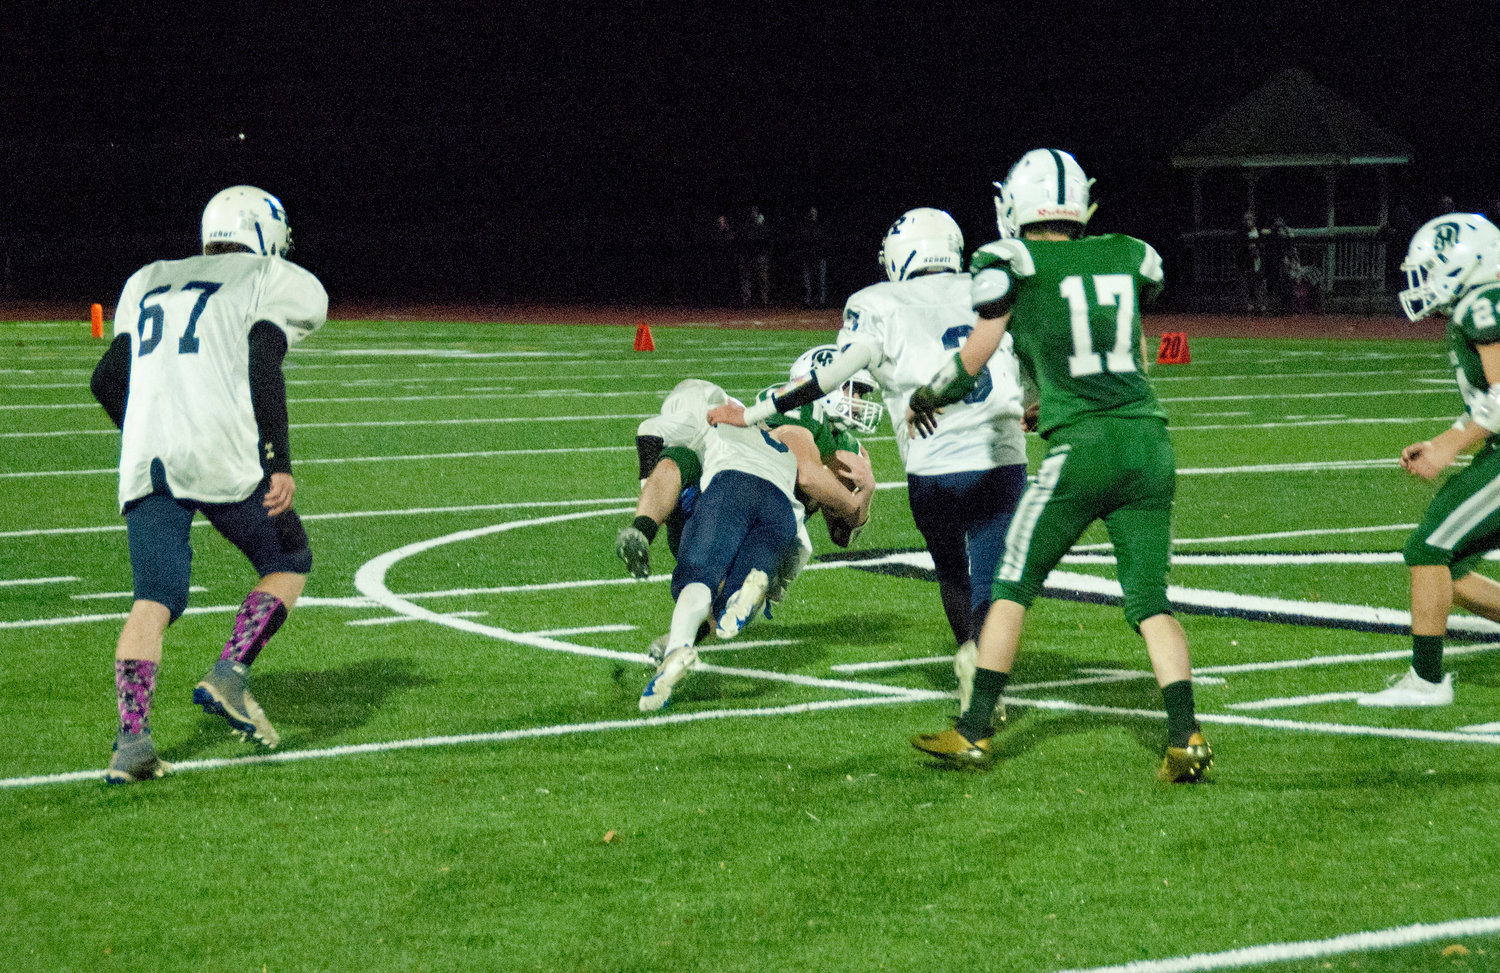 Alaniz Ruiz plants a Spackenkill running back to the turf with a textbook form tackle. Ruiz made his presence known on both sides of the ball all season long.